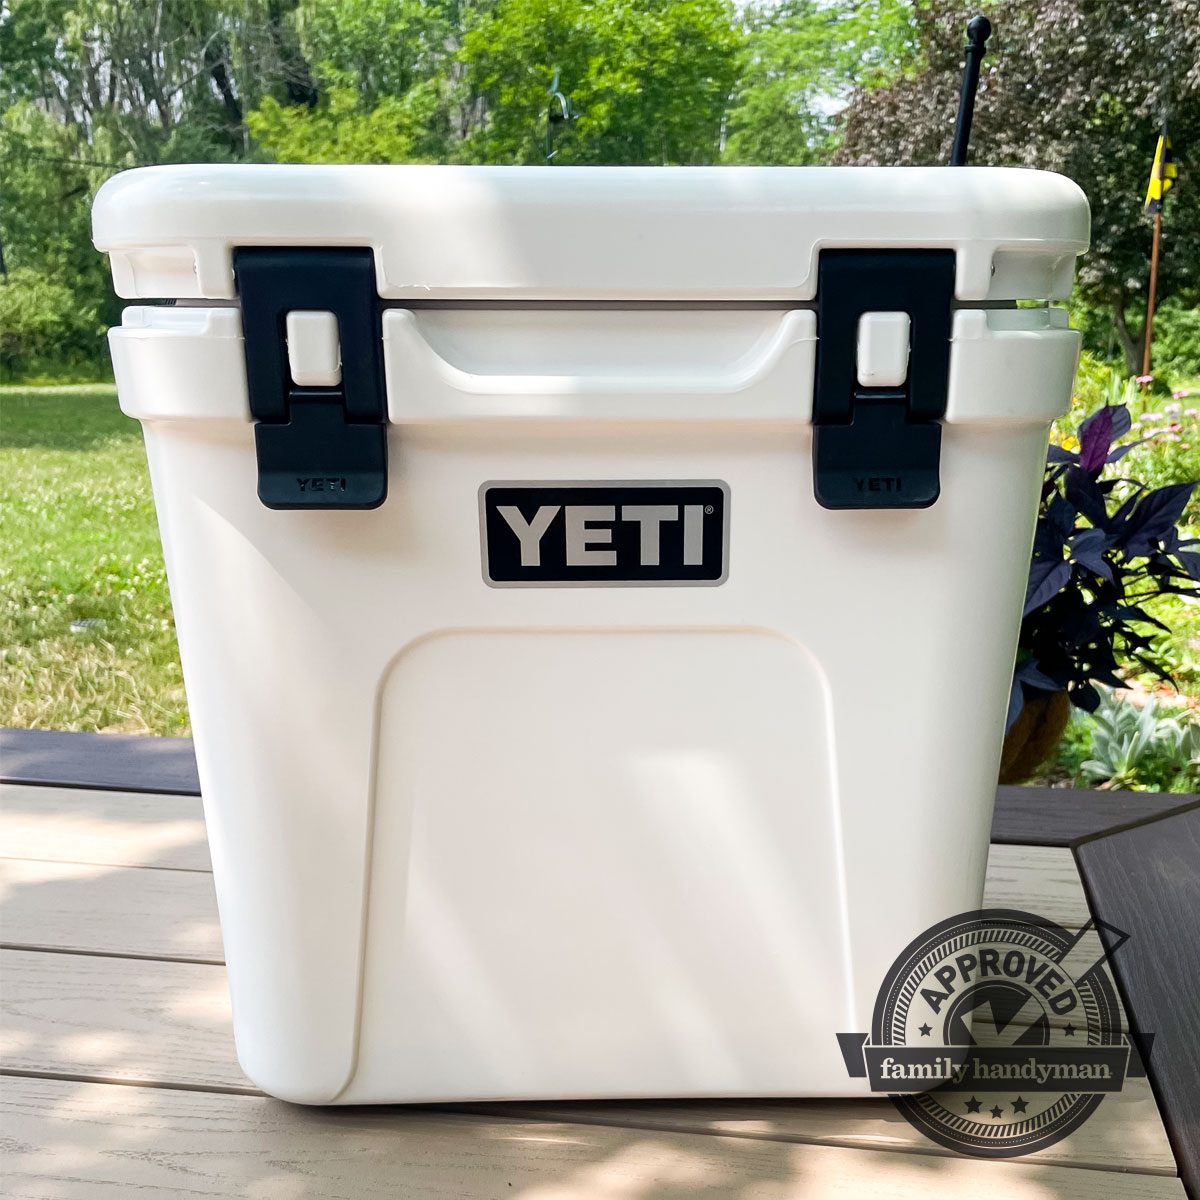 https://www.familyhandyman.com/wp-content/uploads/2023/08/FHM-The-9-Best-Yeti-Products-Our-Editors-Tested-and-Loved-Yeti-Roadie-24-Hard-Cooler-Mary-Henn-Family-Handyman-YETI-Roadie-24_KSedit.jpg?fit=700%2C700